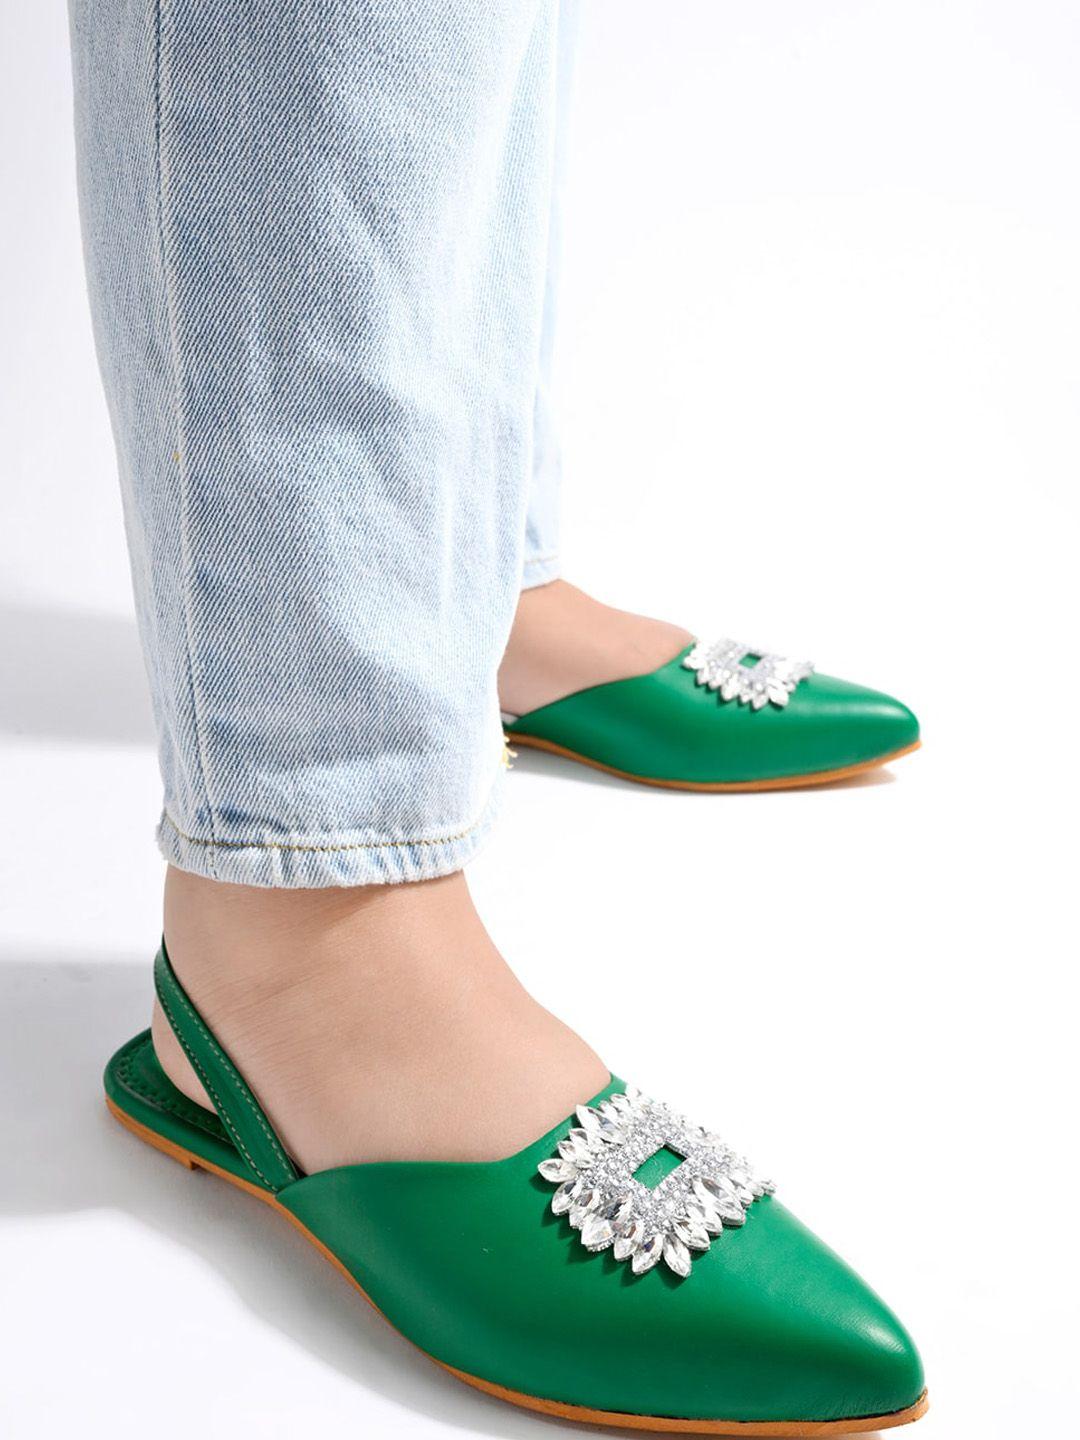 stylestry pointed toe embellished mules